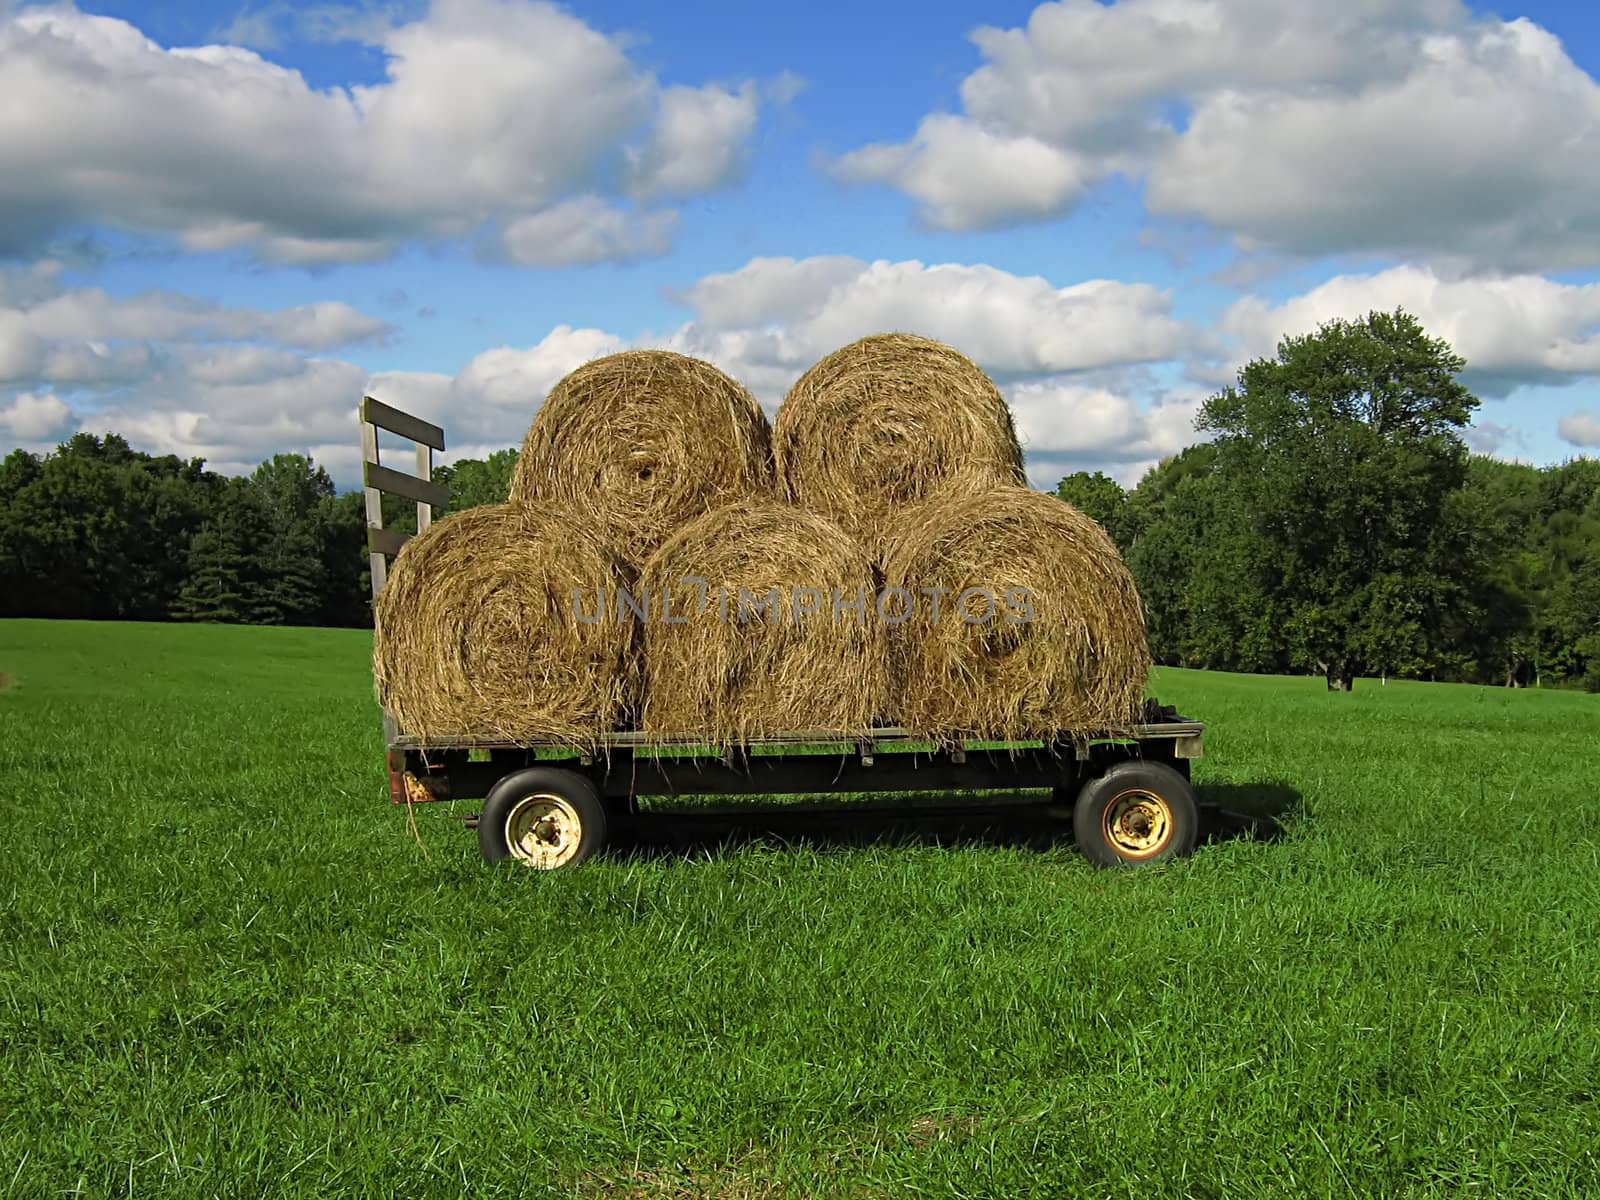 A photograph of a farm wagon loaded with hay.
